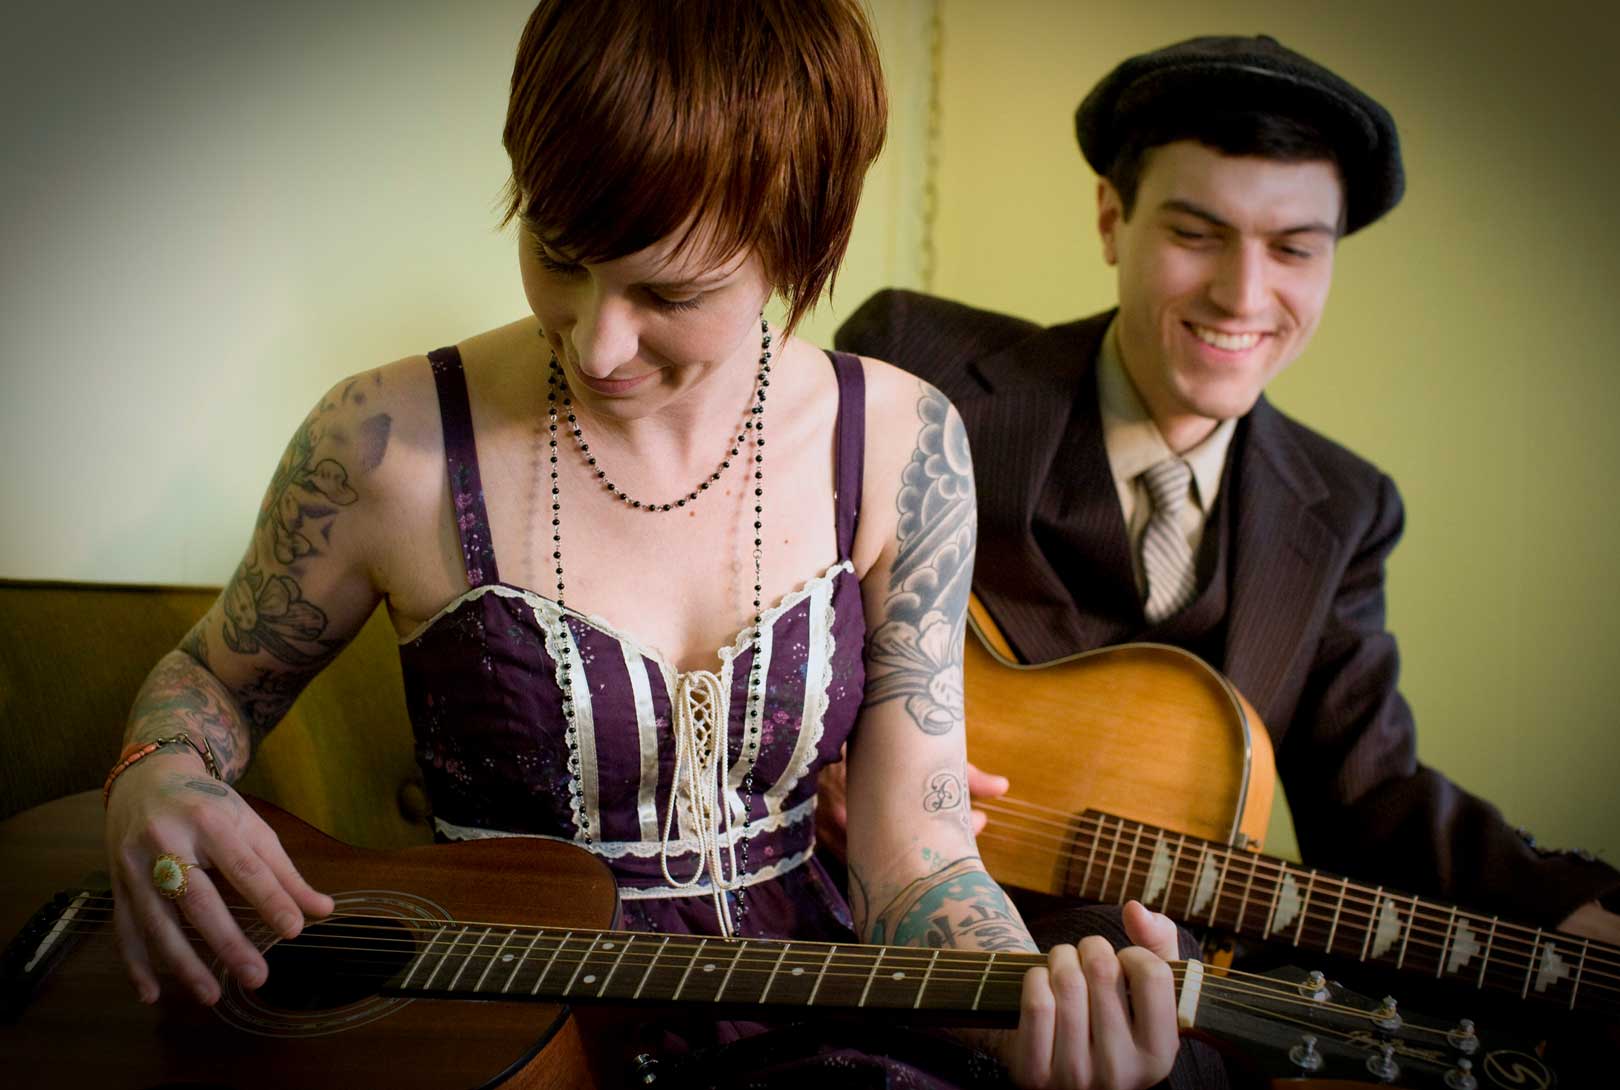 Kate with tattooed arms wearing purple dress with Steven in vintage suit and hat playing guitars